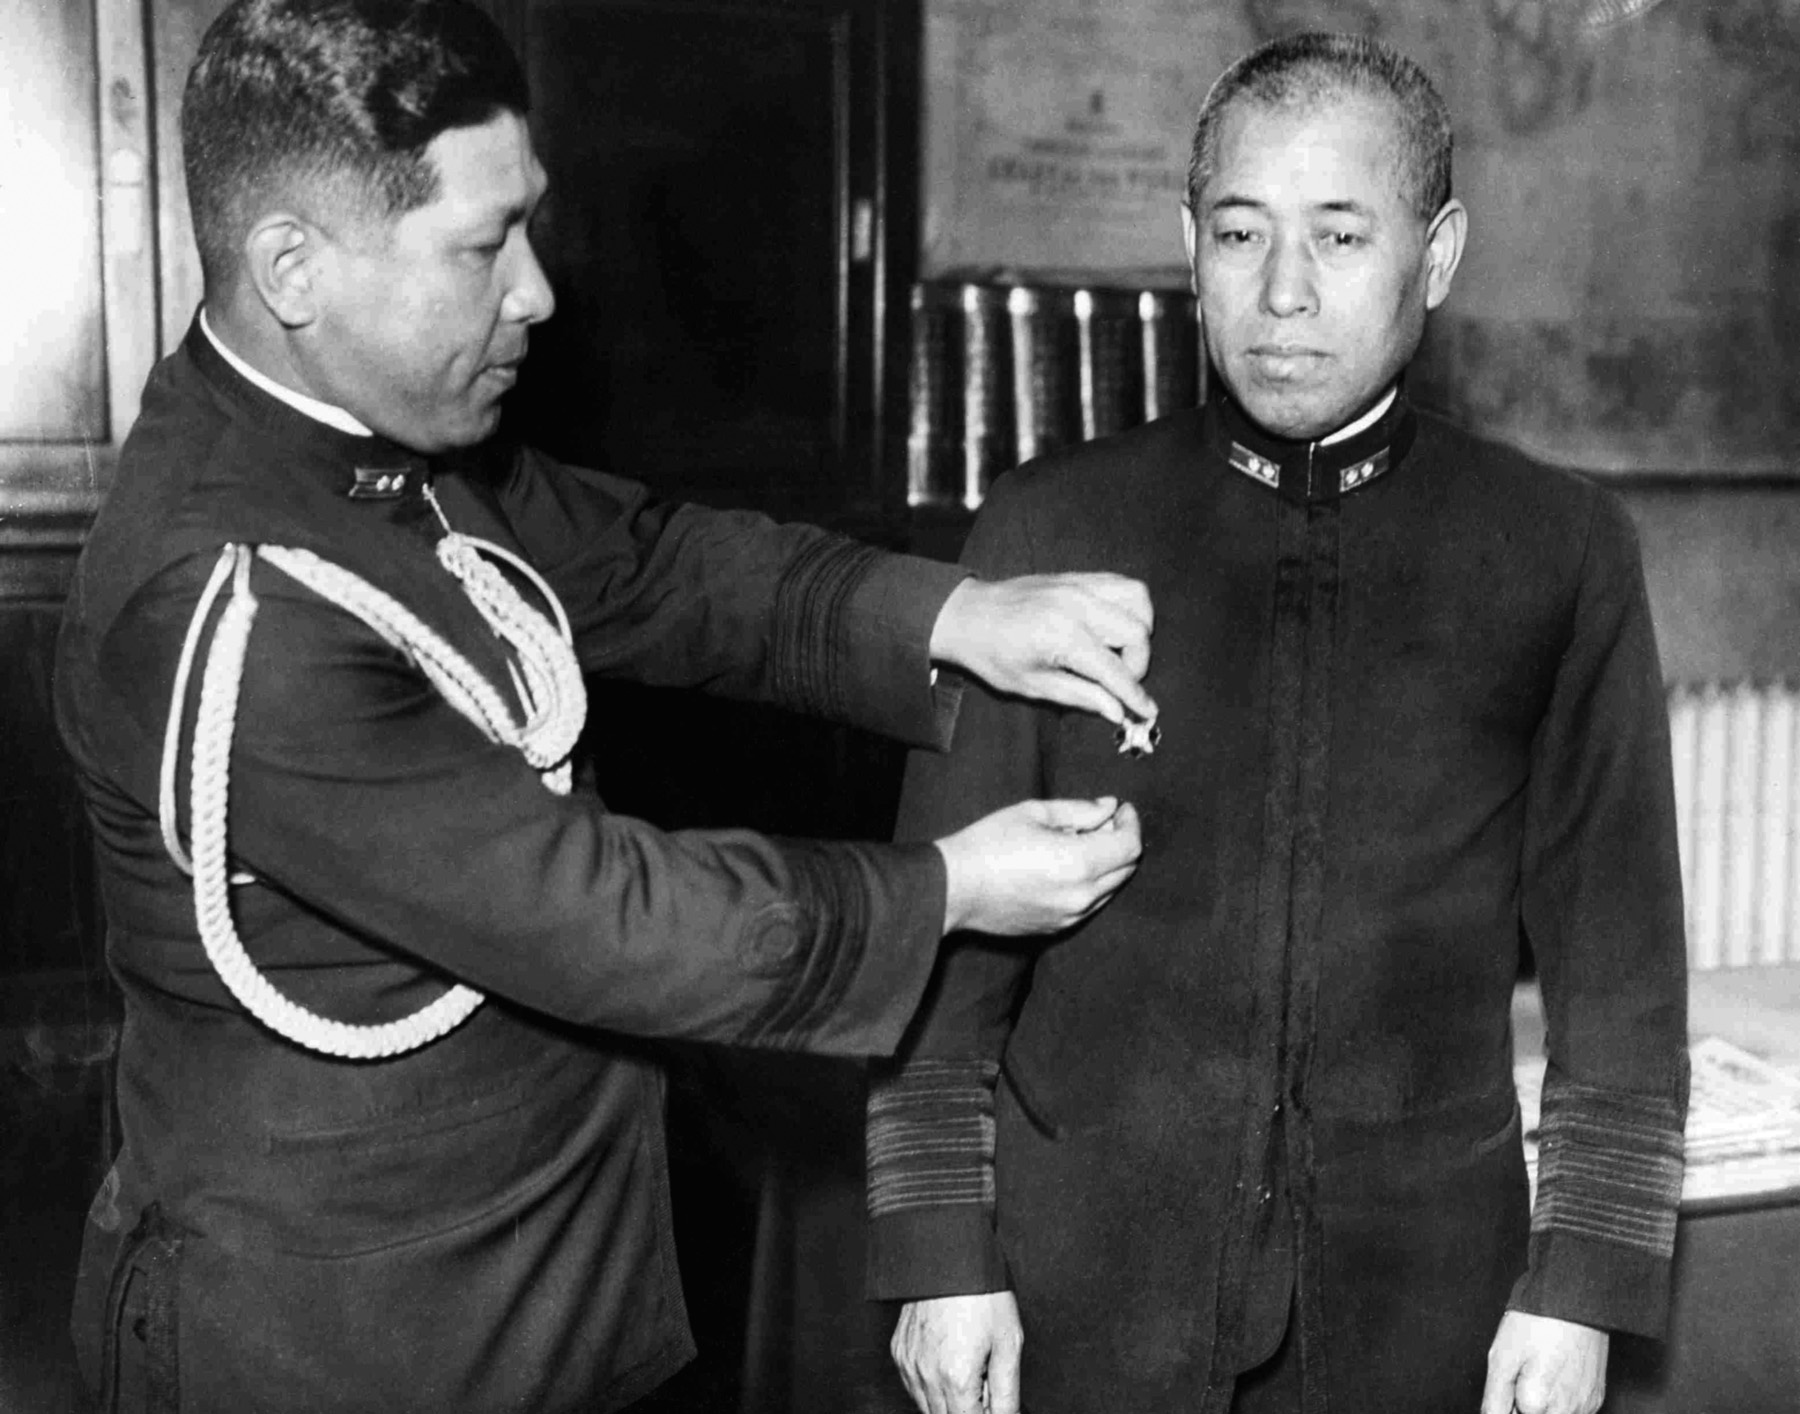 After suffering wounds at the Battle of Tsushima, Yamamoto received the wound badge. In this photograph, a Japanese naval officer adjusts the decoration on his tunic.